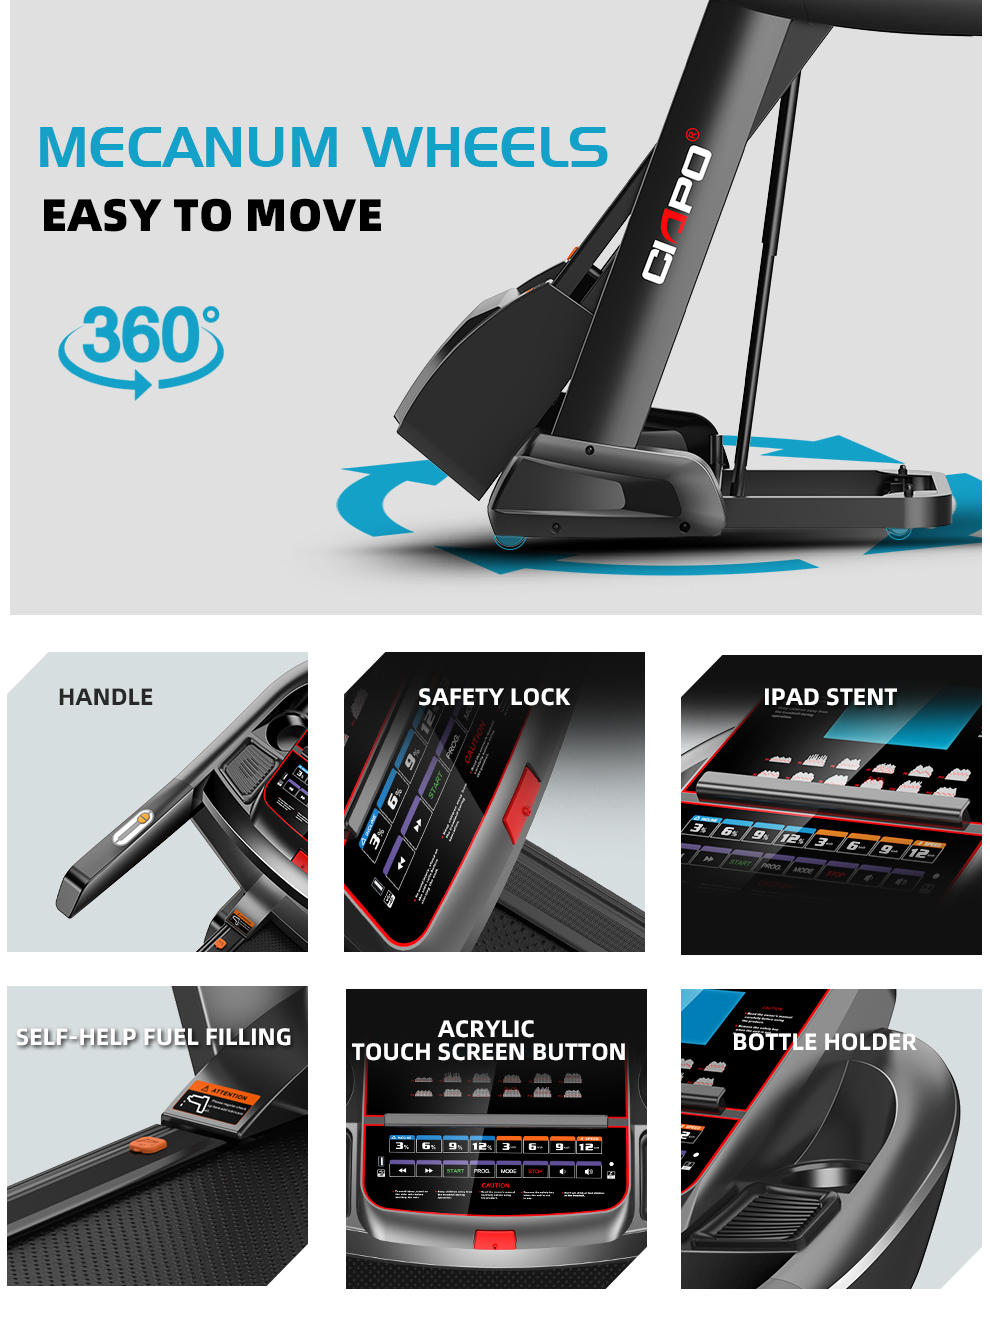 Hot selling Electric Treadmill Gym Equipment In stock